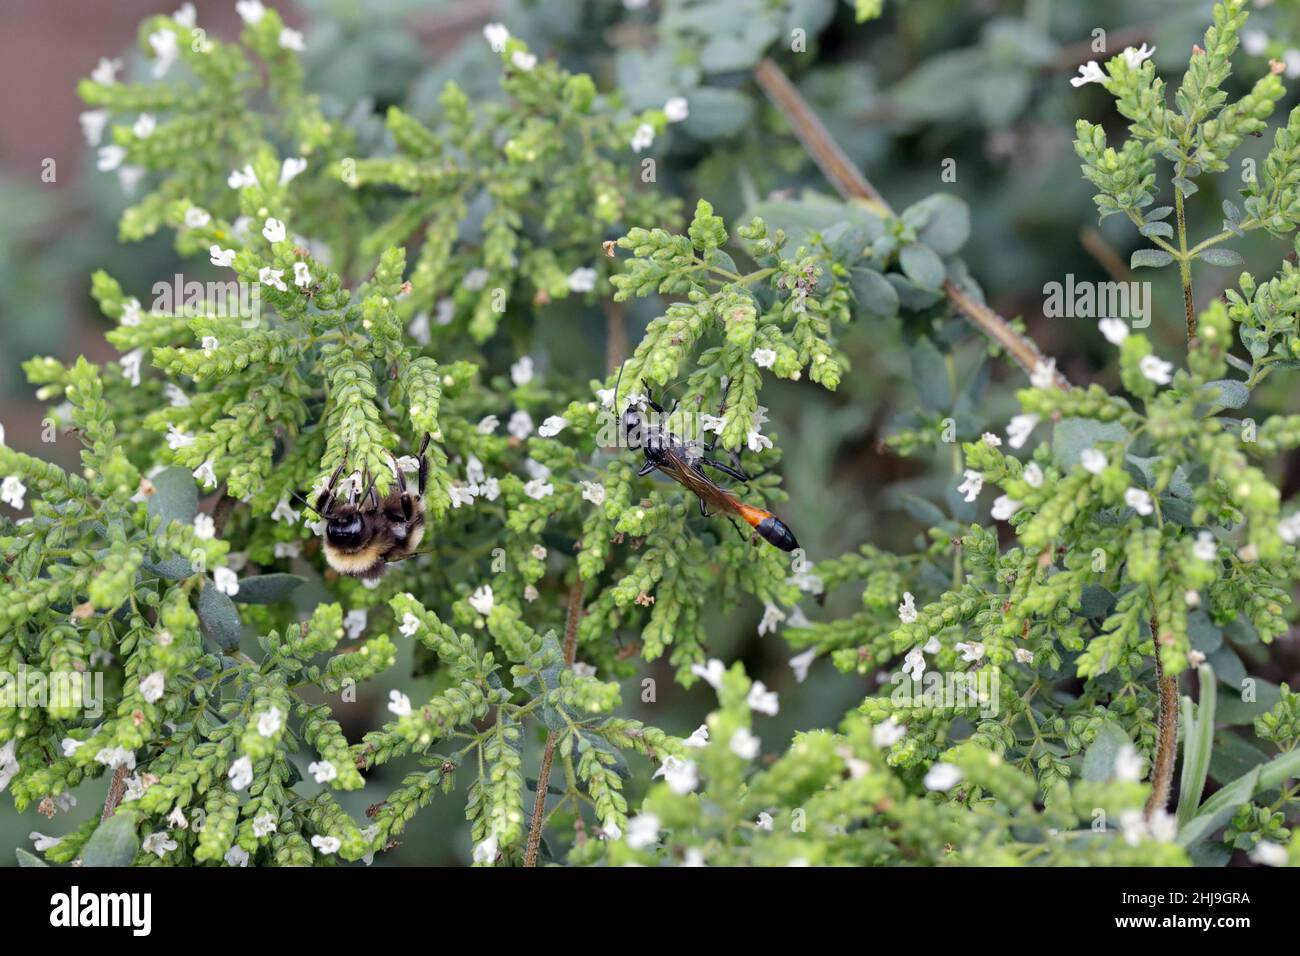 Wild bees on ornamental sheds and flowering herbs (Greek oregano) in the garden. Stock Photo